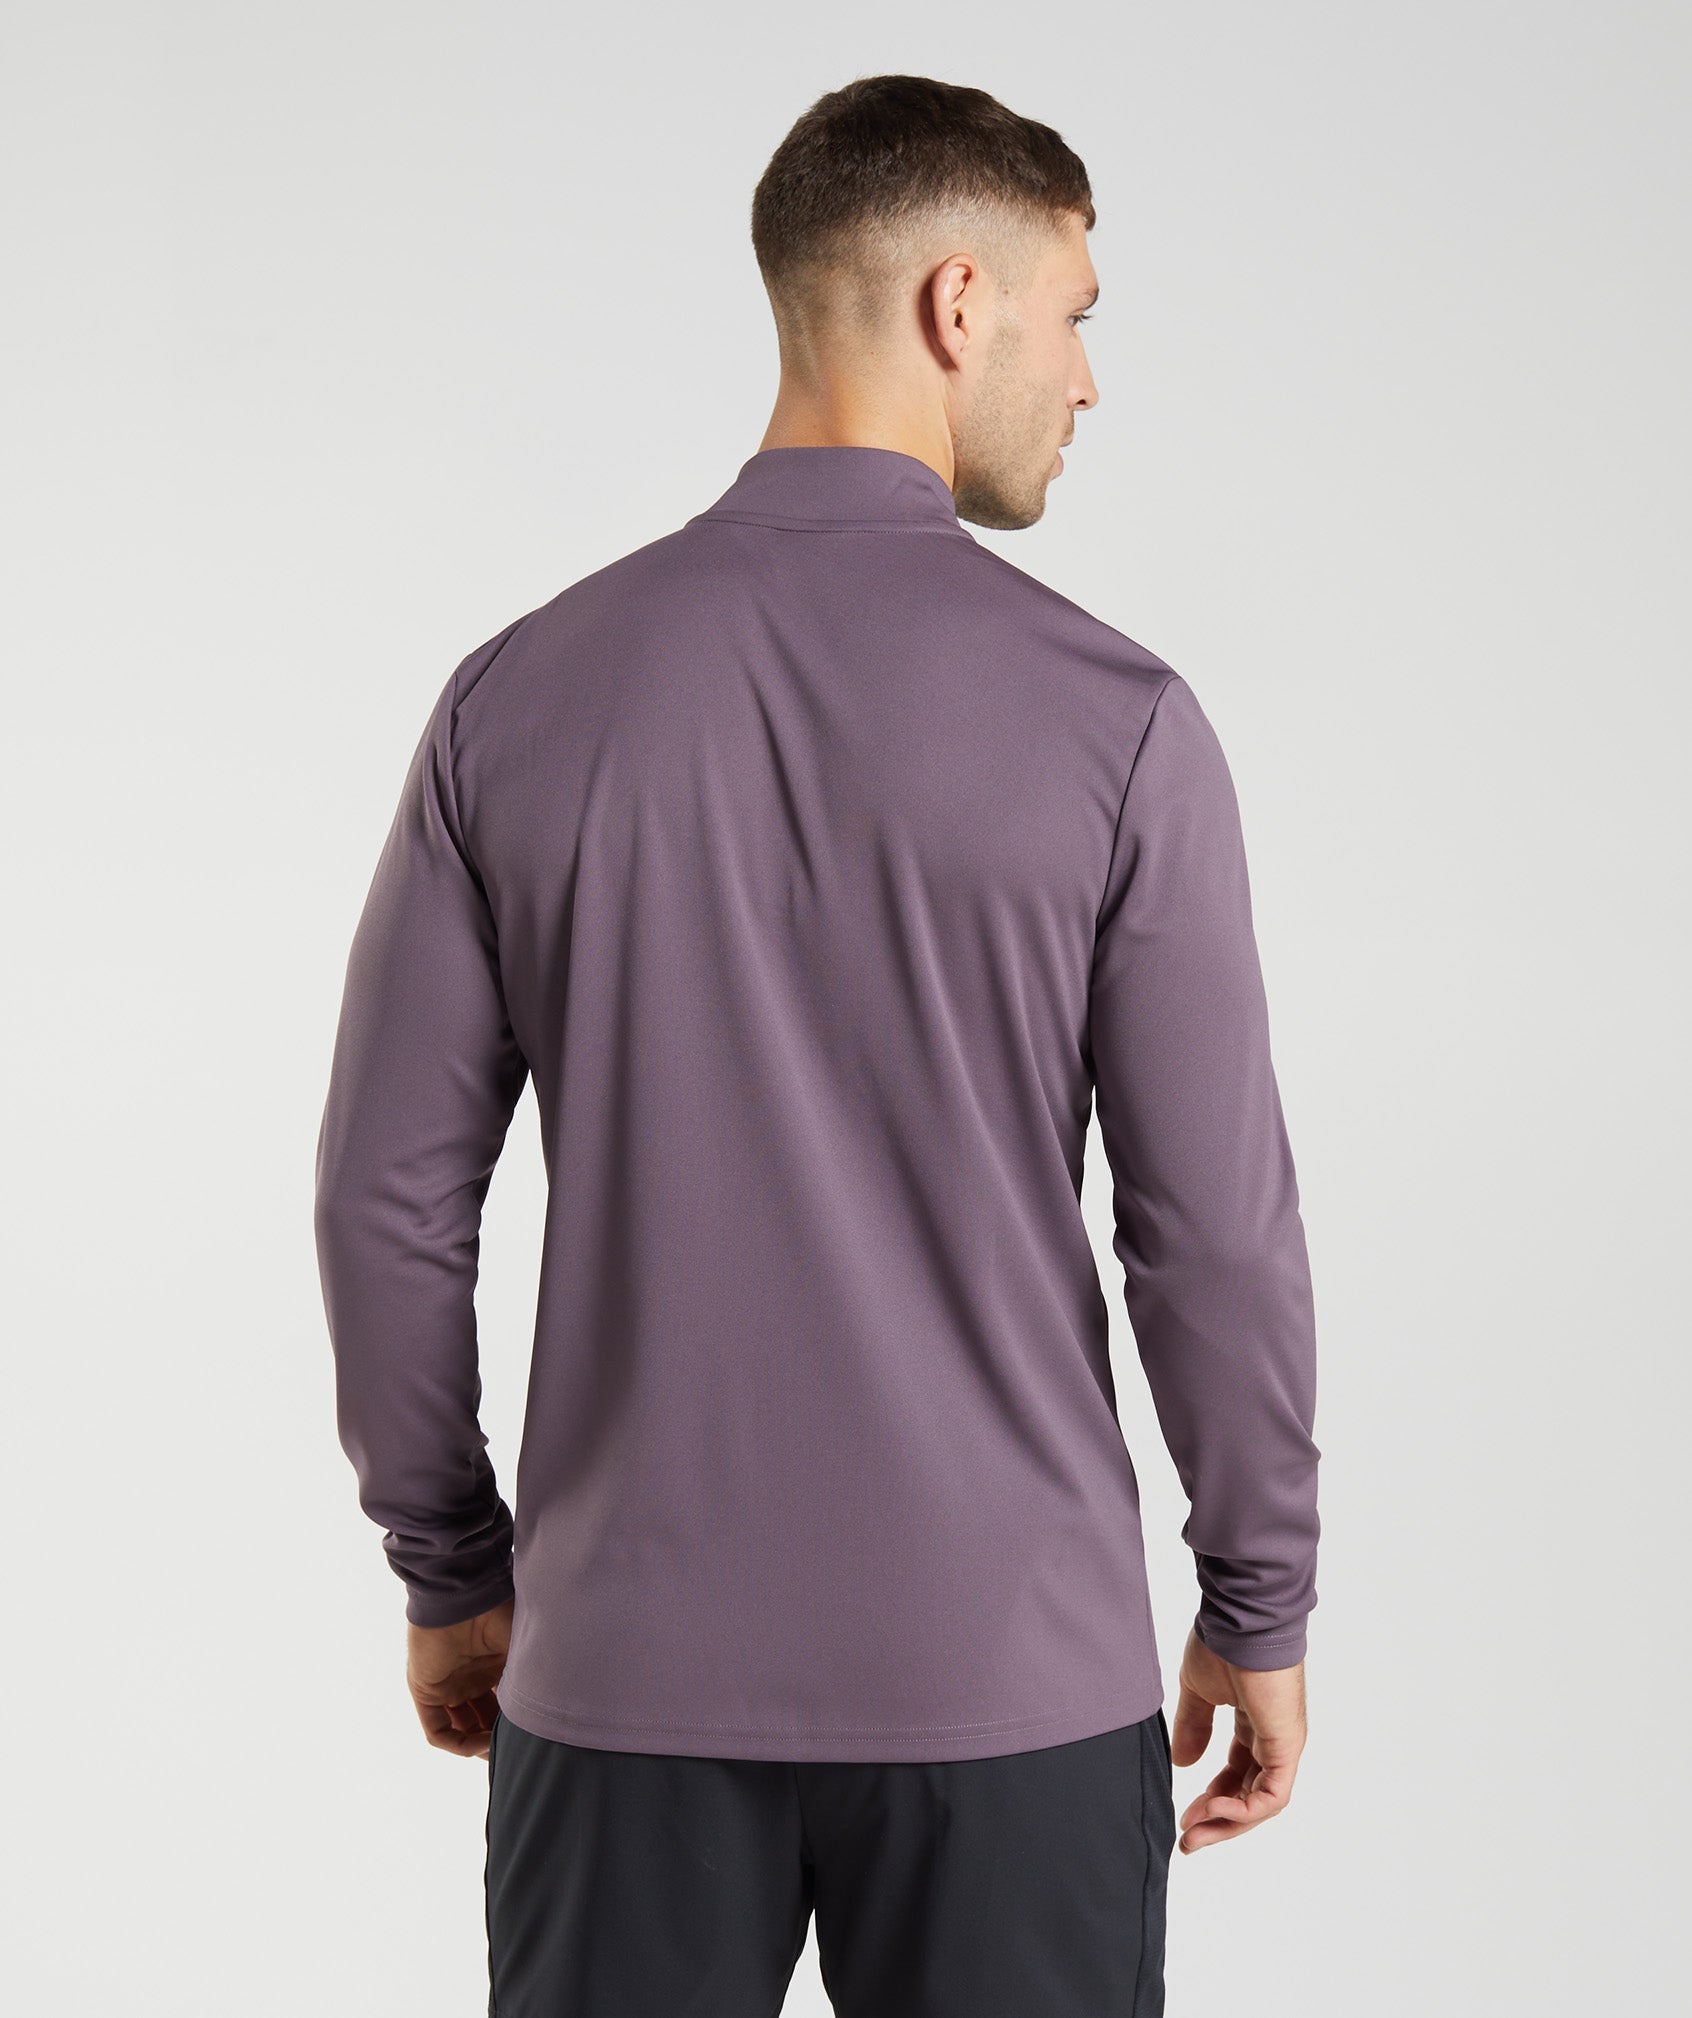 Arrival 1/4 Zip Pullover in Musk Lilac - view 2